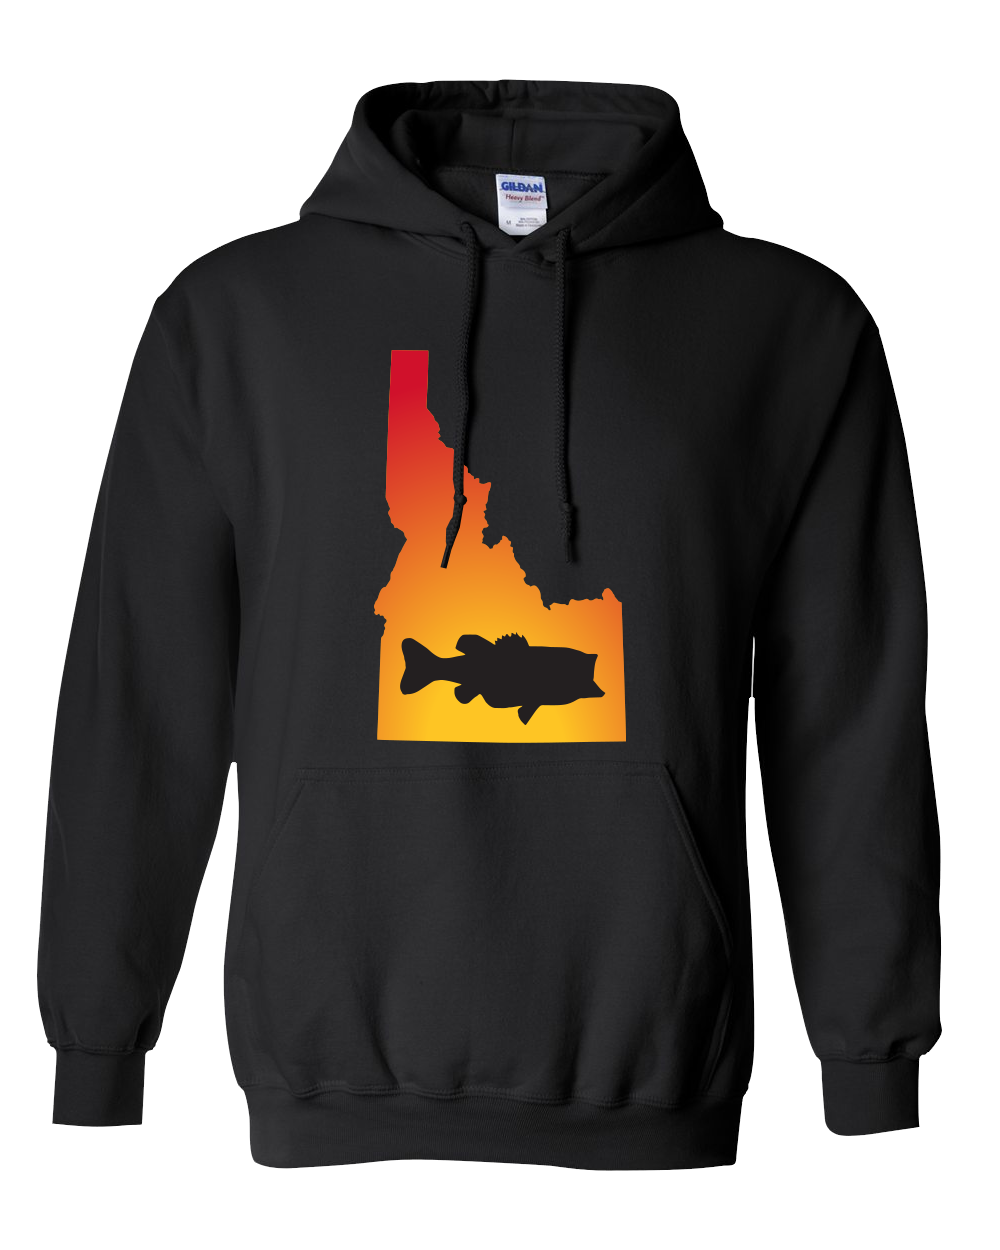 Pullover Hooded Sweatshirt Idaho Black Large Mouth Bass Vibrant Design High Quality Tight Knit Ring Spun Low Maintenance Cotton Printed With The Newest Available Color Transfer Technology